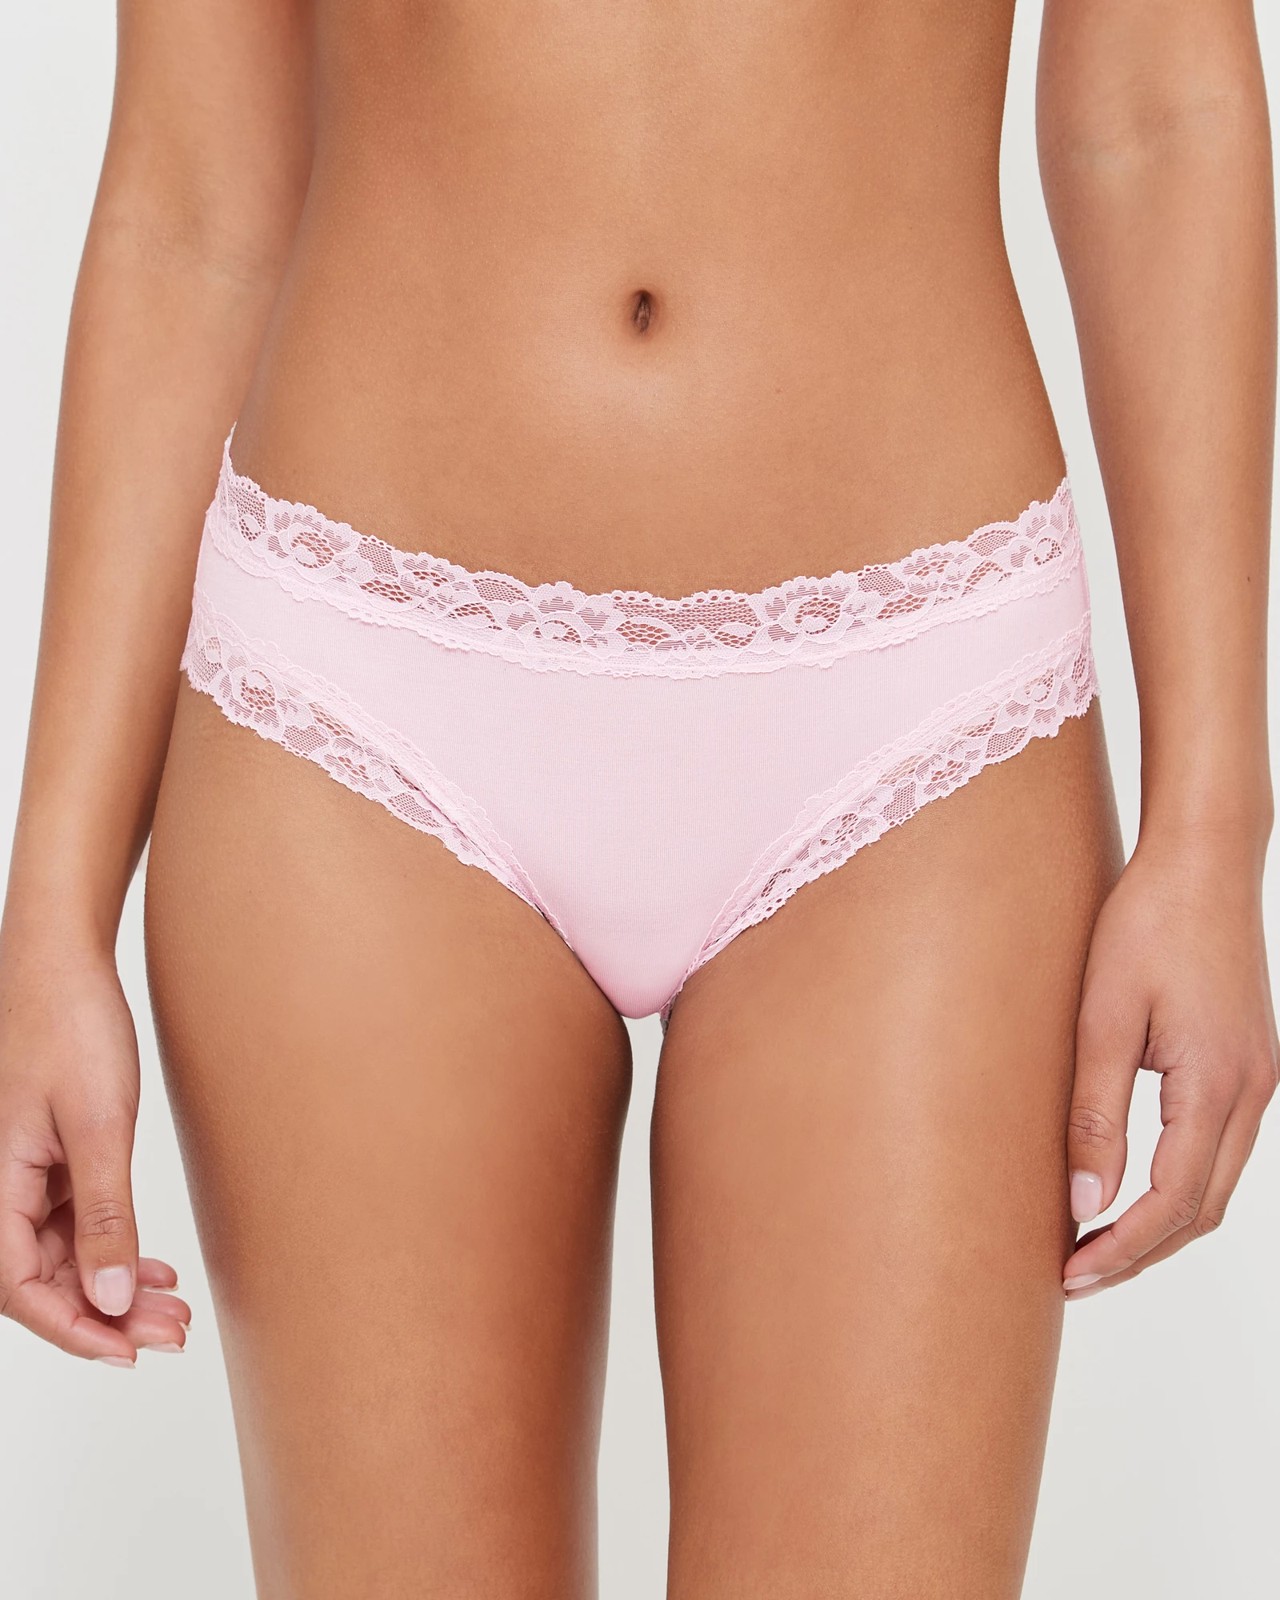 Womens Lace Briefs : Target